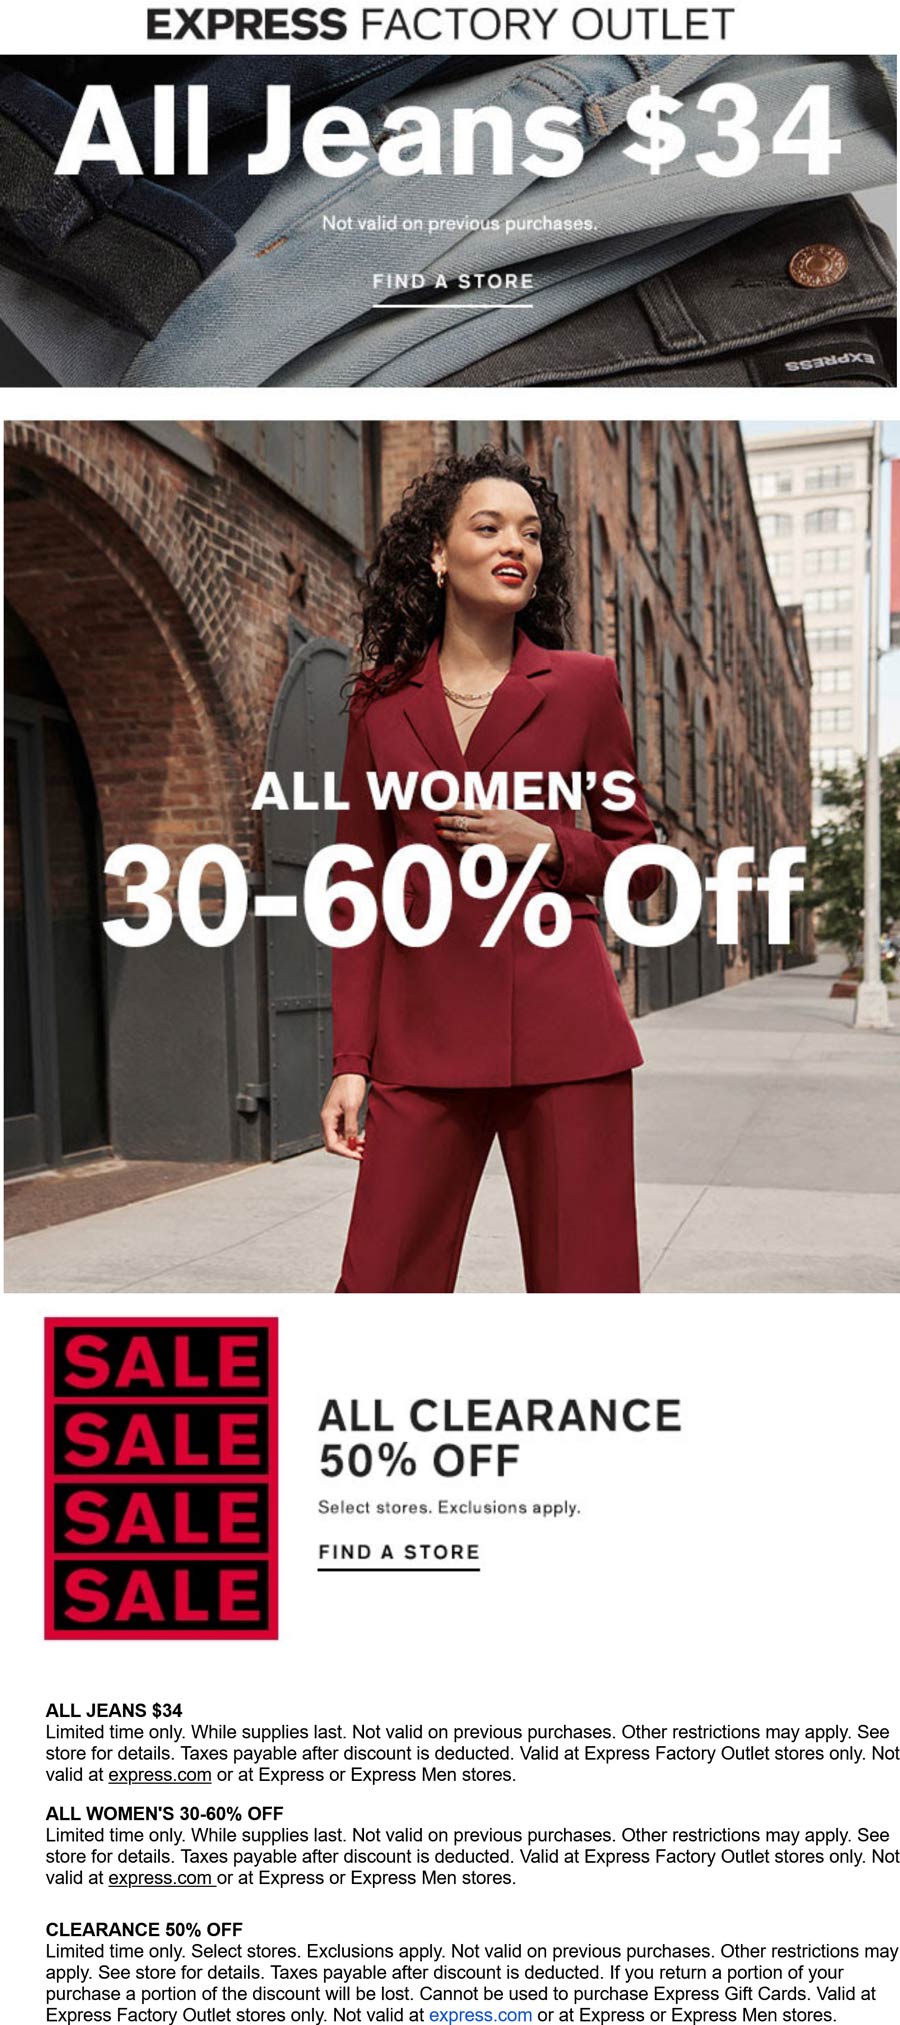 Express Factory Outlet stores Coupon  30-60% off womens at Express Factory Outlet #expressfactoryoutlet 